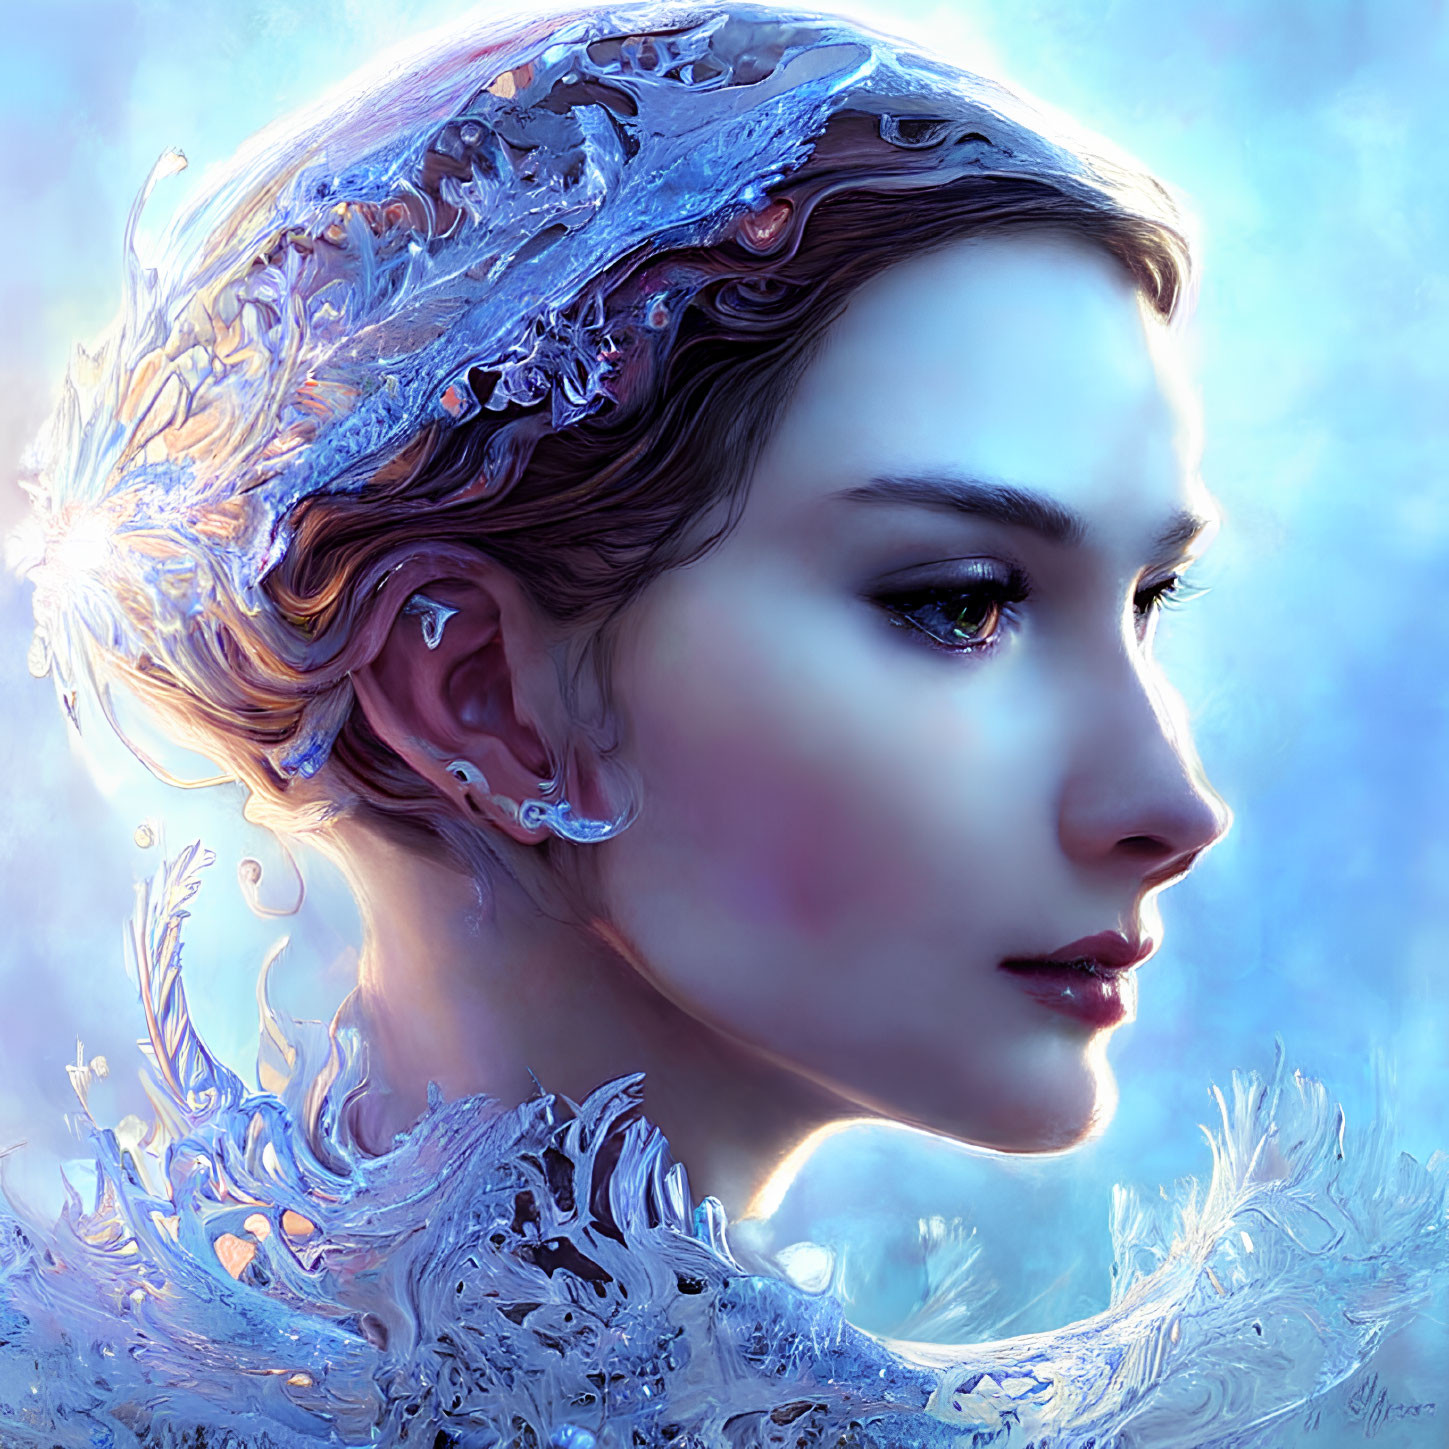 Digital Artwork: Woman with Ice-Crystal Crown and Frosty Adornments